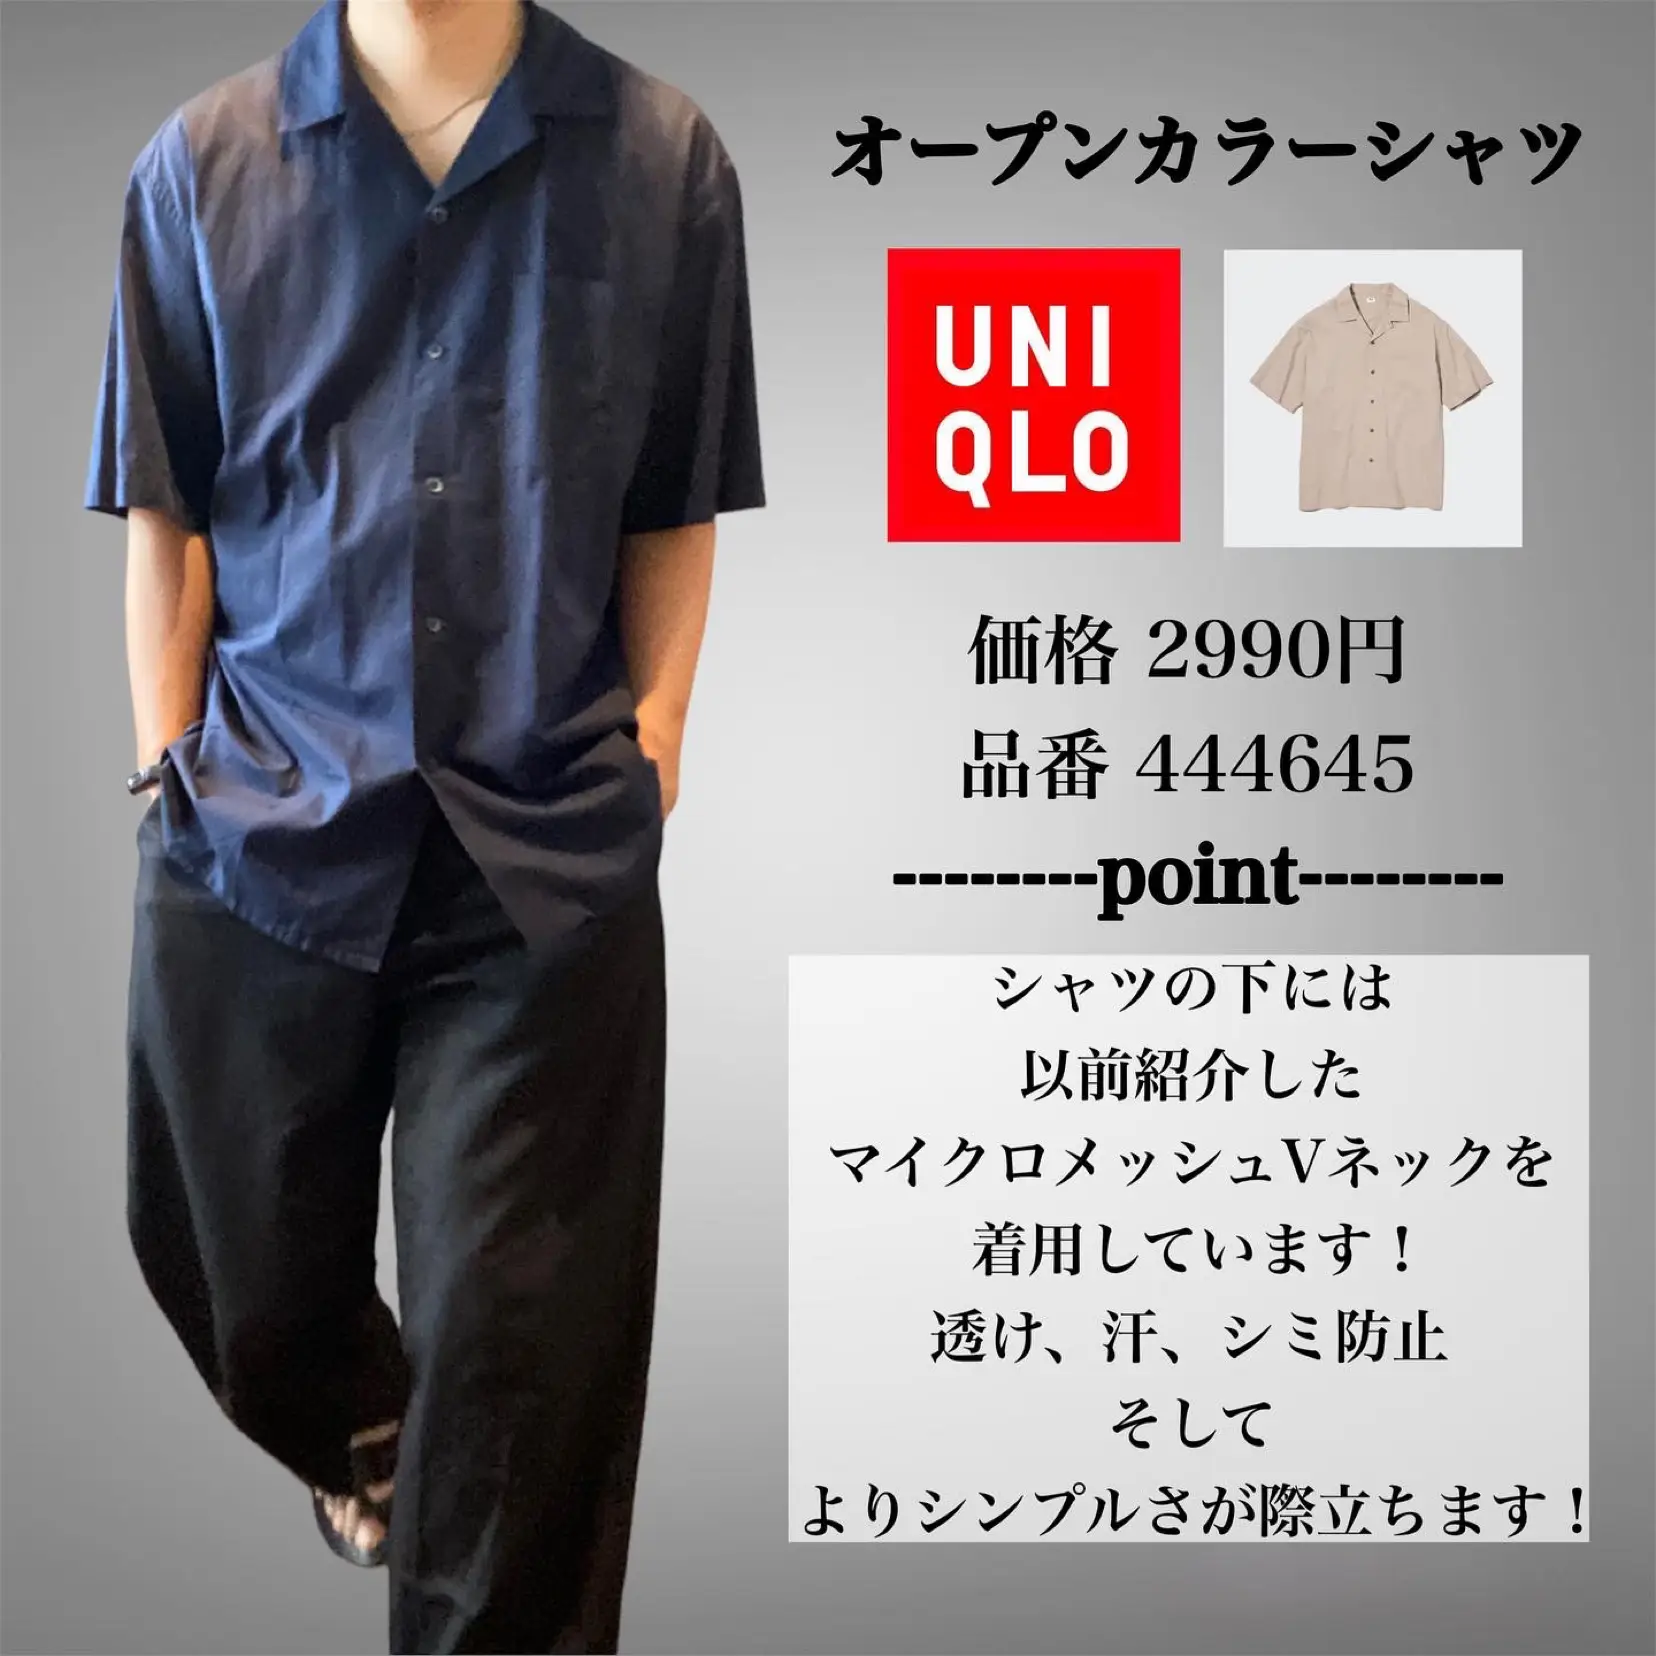 I regret buying this,、、 | Gallery posted by Dai⇢UNIQLO/GU